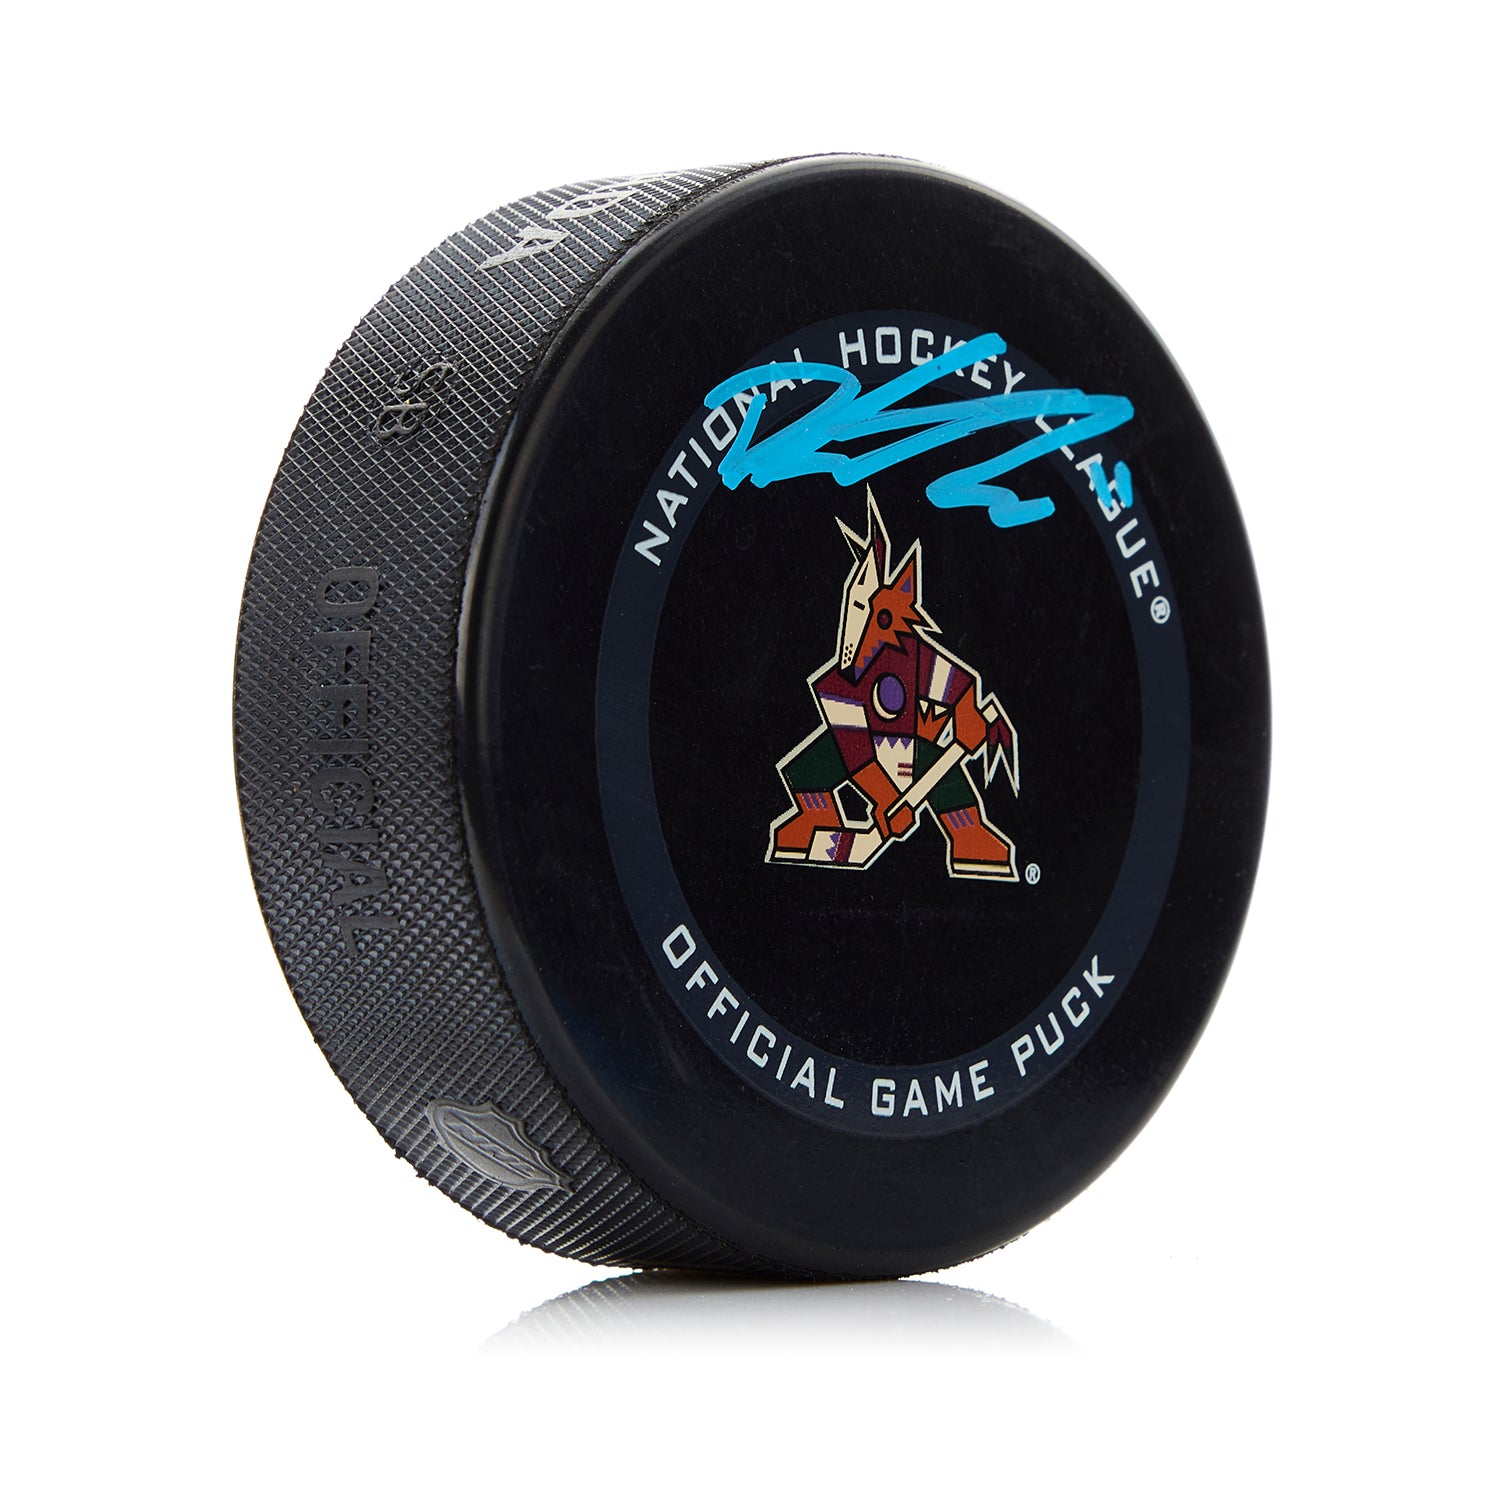 Dylan Guenther Signed Arizona Coyotes Official Game Puck